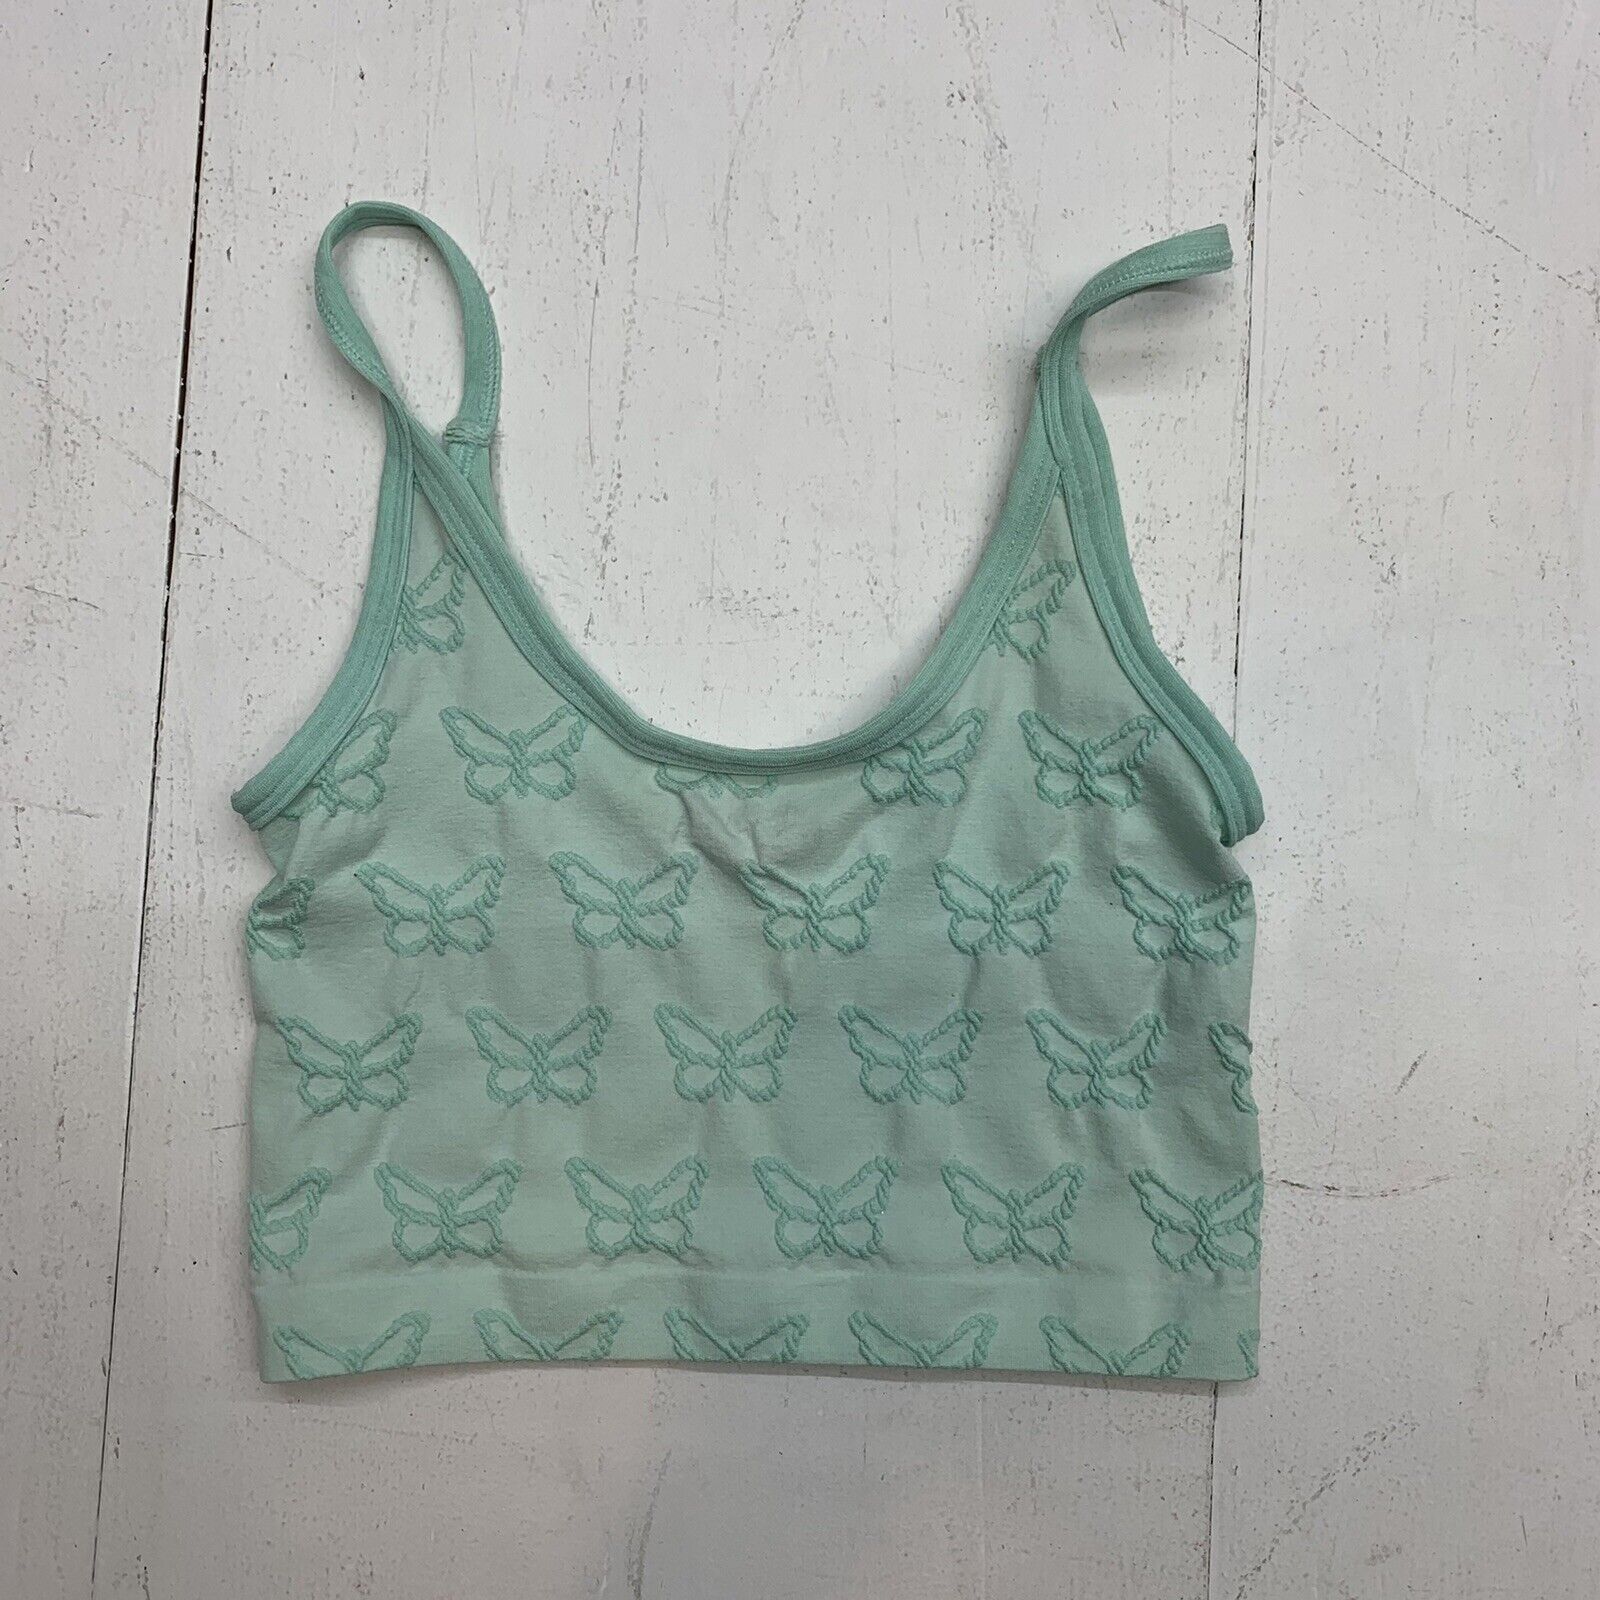 urban outfitters womens Teal butterfly bra size medium - beyond